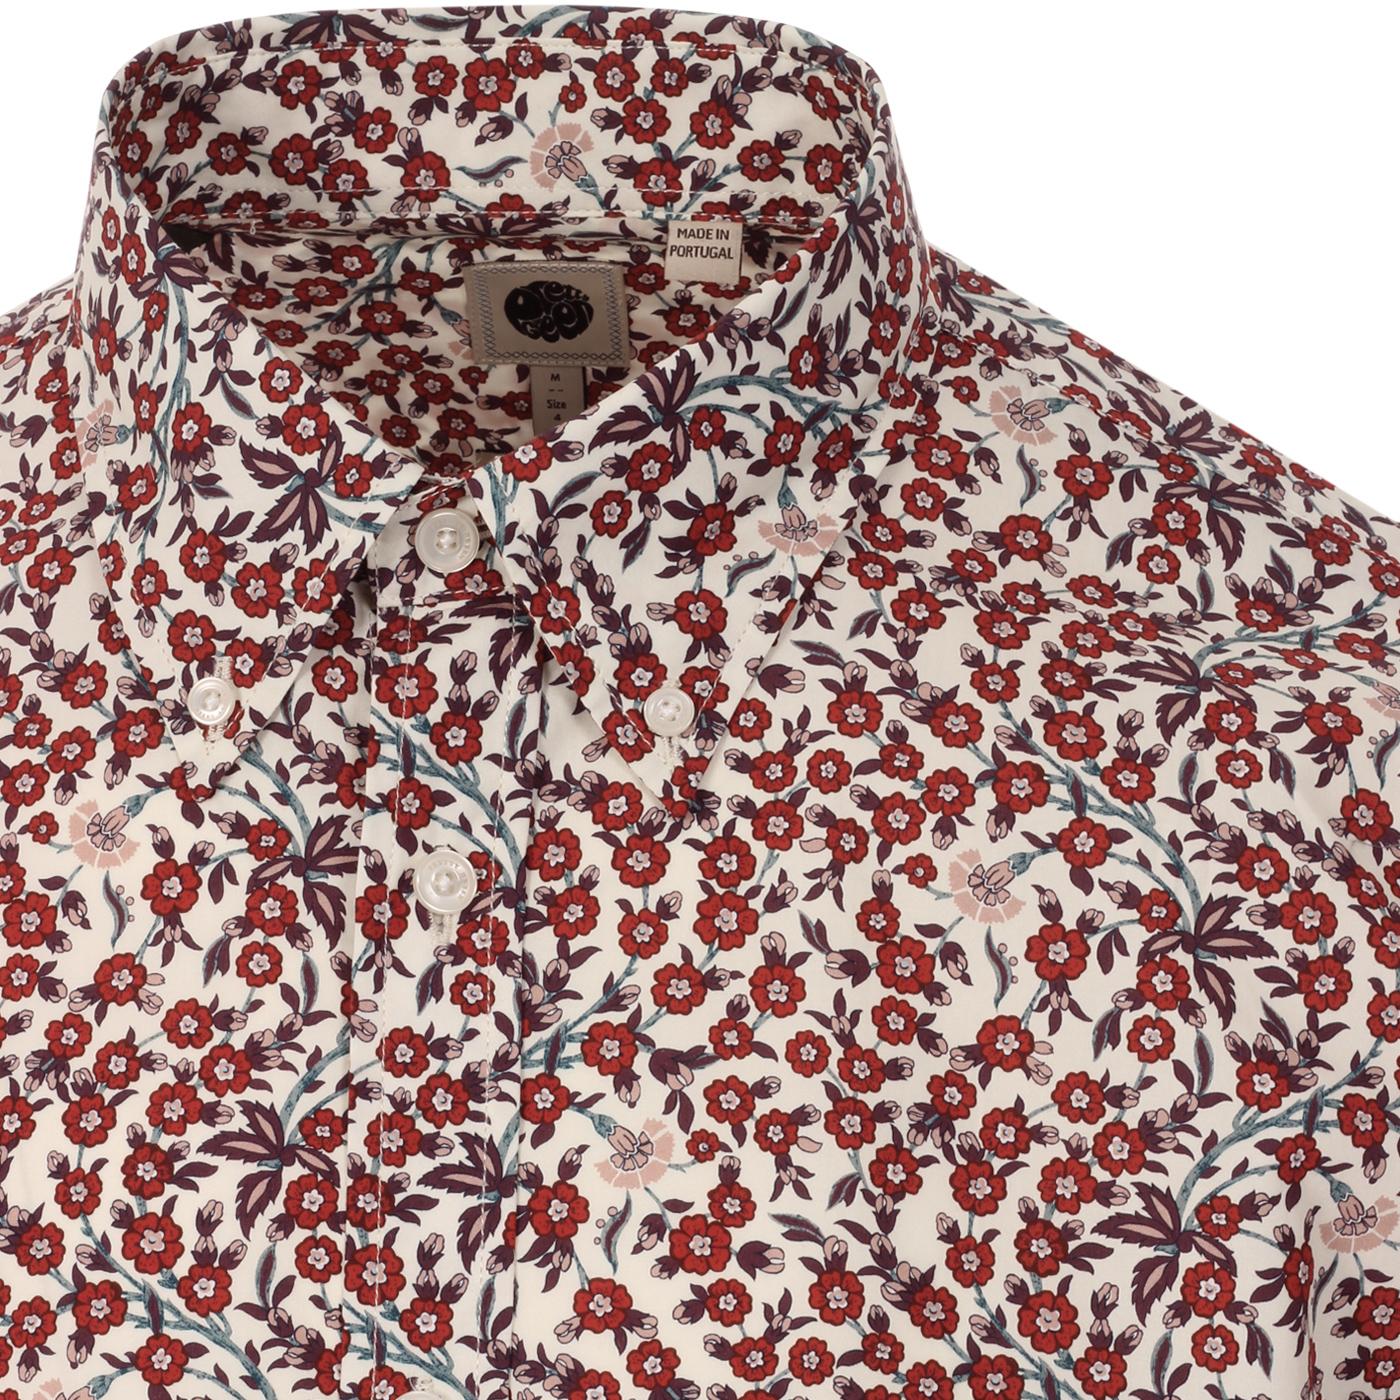 PRETTY GREEN Liberty Print Retro Floral Shirt In Red